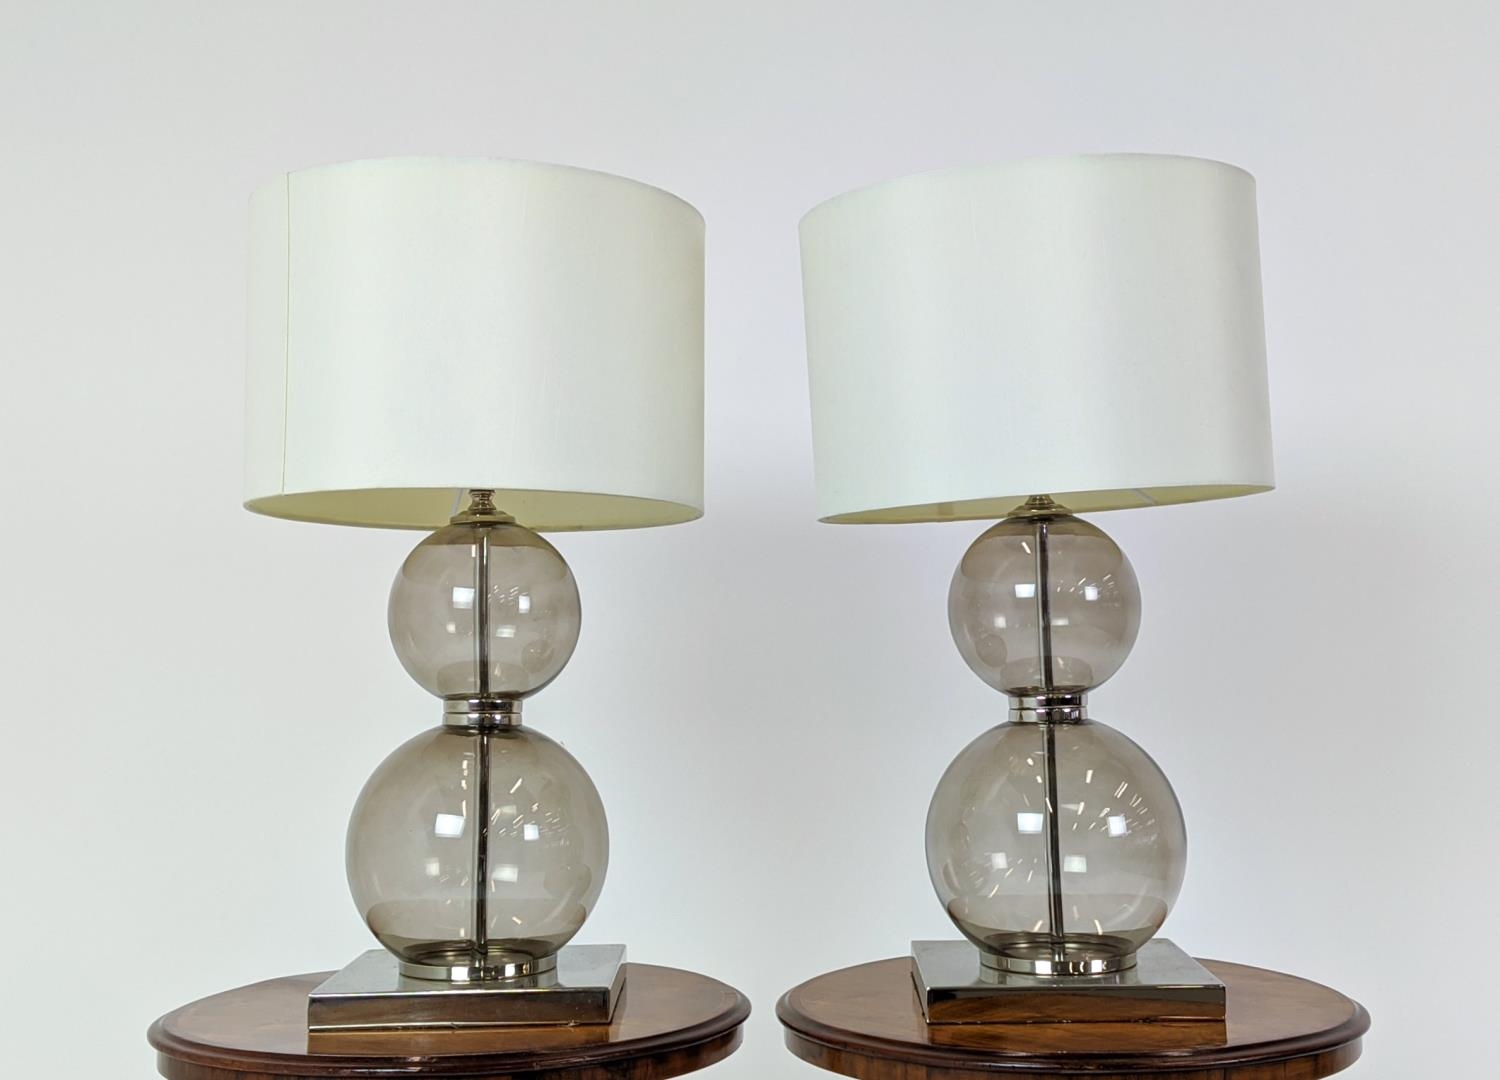 TABLE LAMPS, a pair, glass ball stems on square polished metal bases, 61cm H x 35cm W in shades. (2)